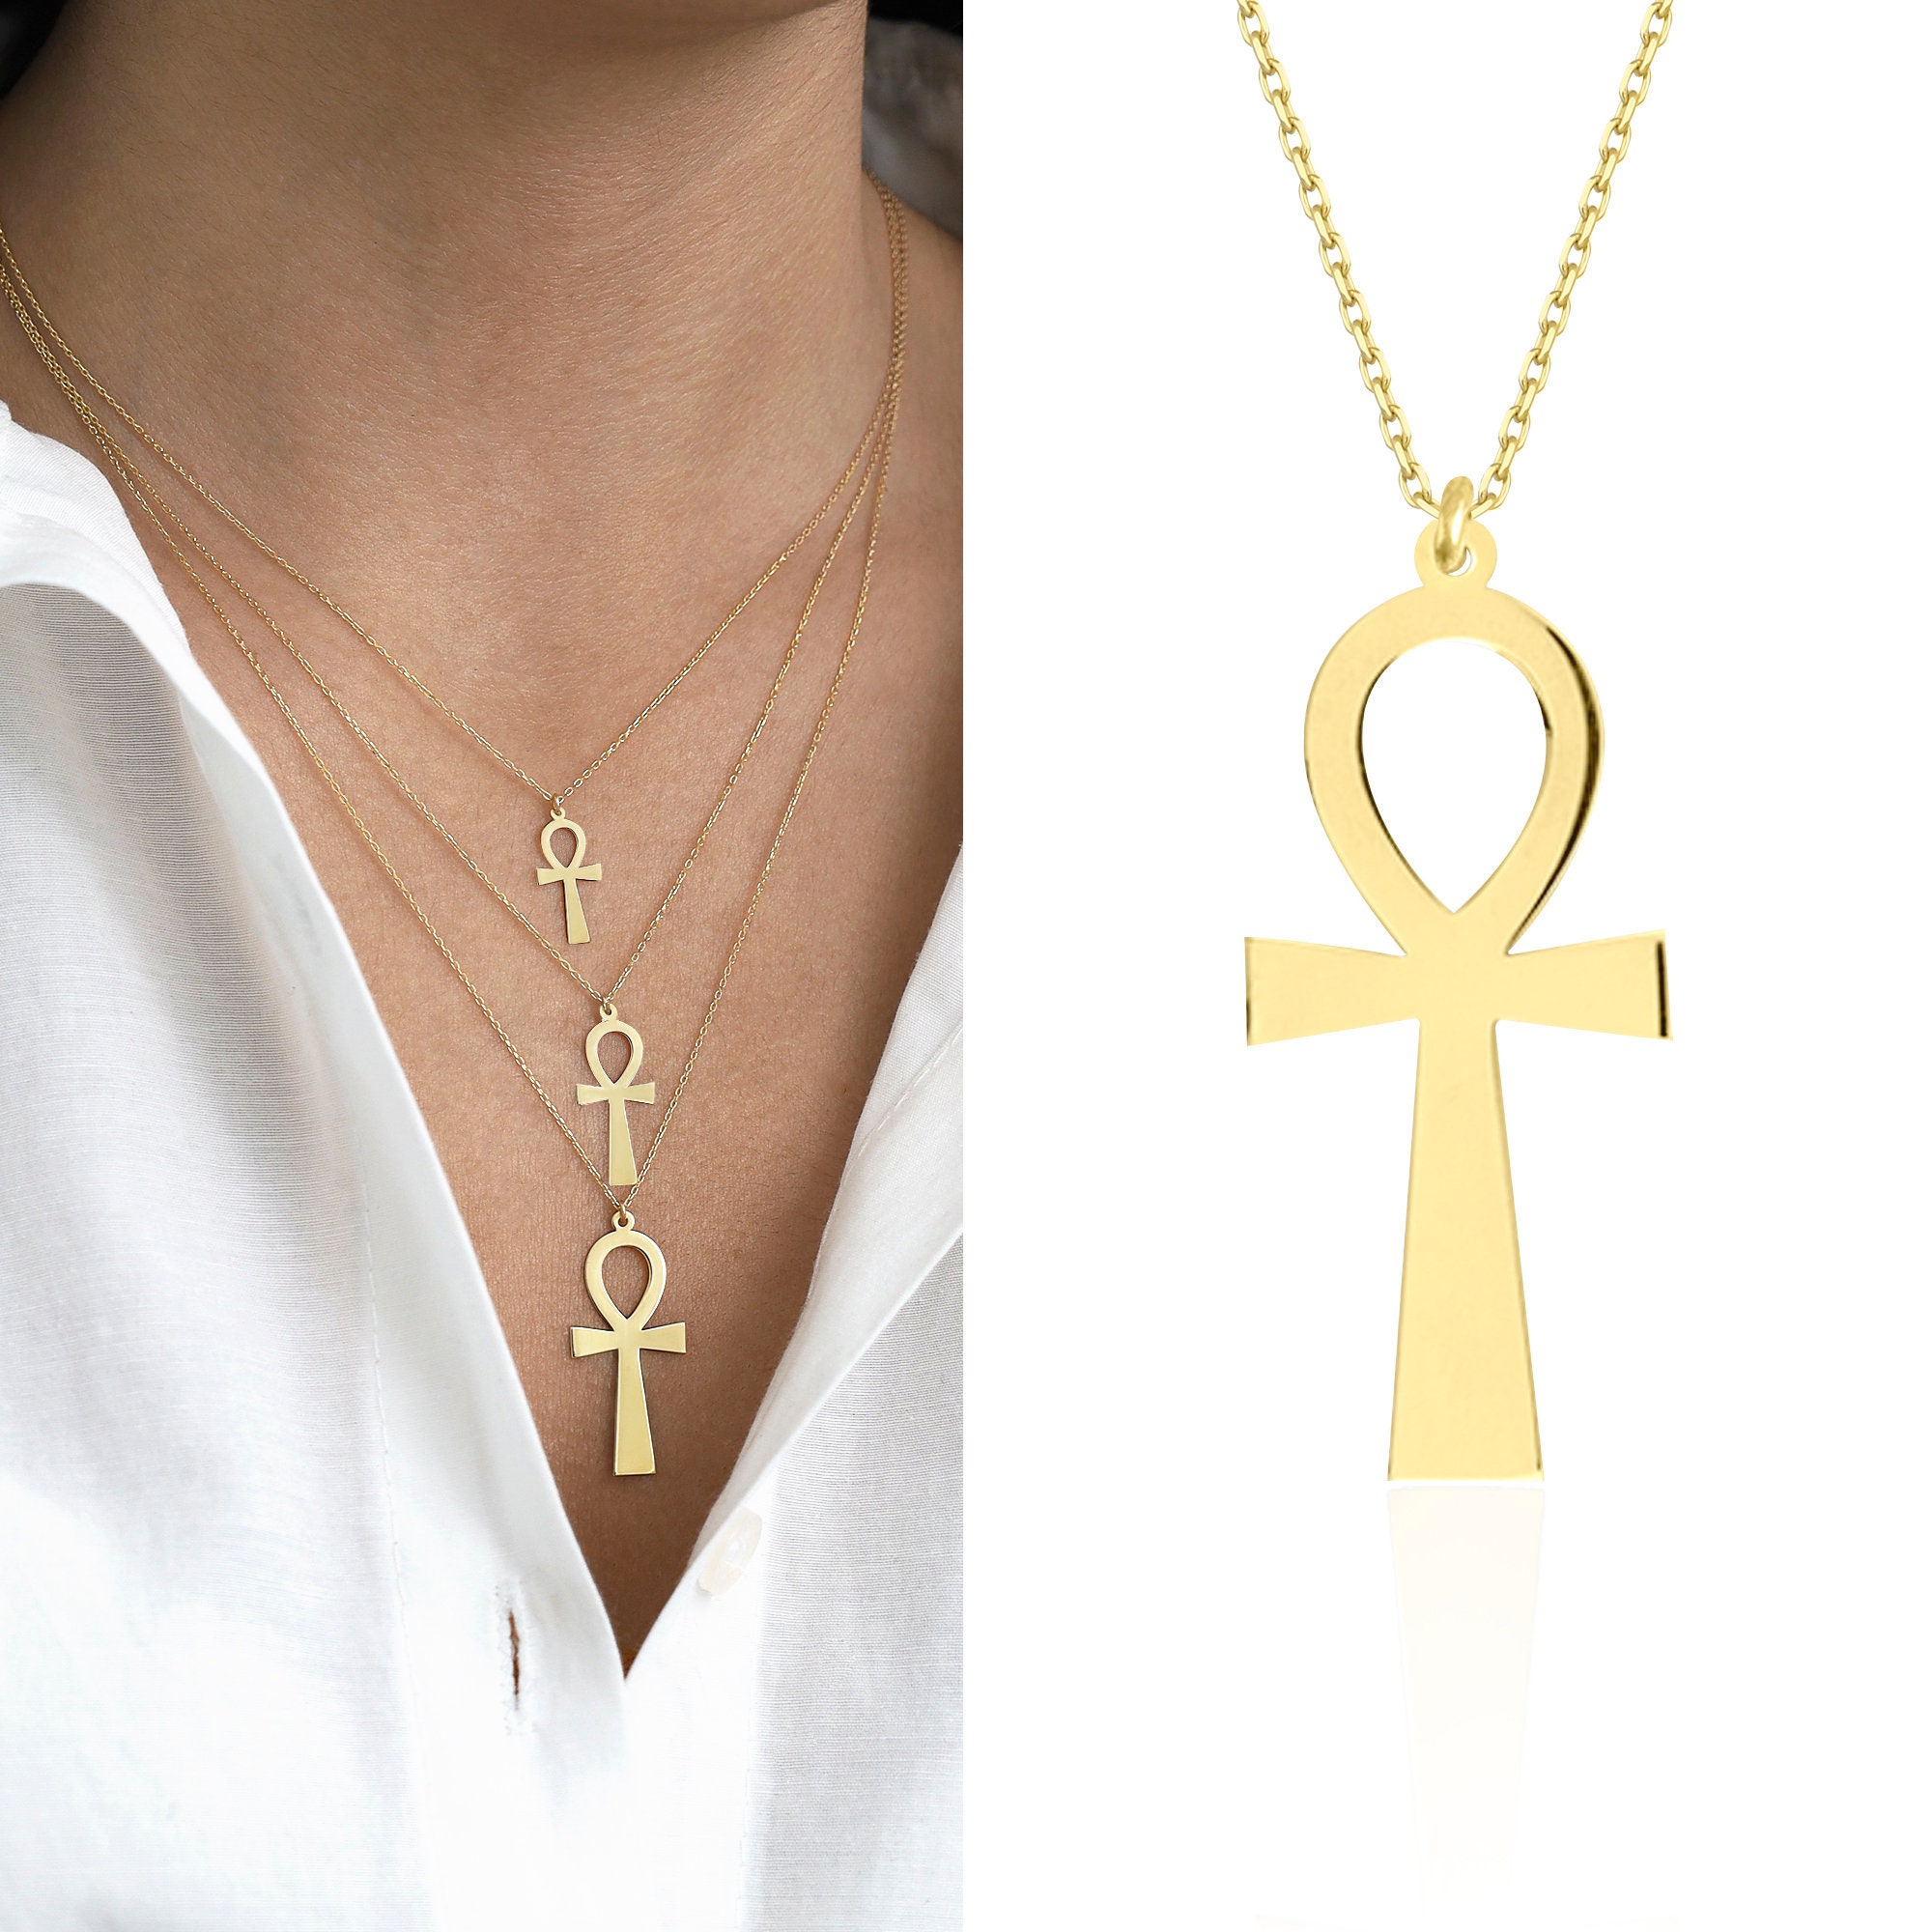 blusa Roble Disciplinario 14k Gold MEDIUM Ankh Necklace | Ancient Ankh Charm Pendant, Life & Soul  Symbol Pharaoh Necklace, Minimalist Cross Necklace | Gift for Her